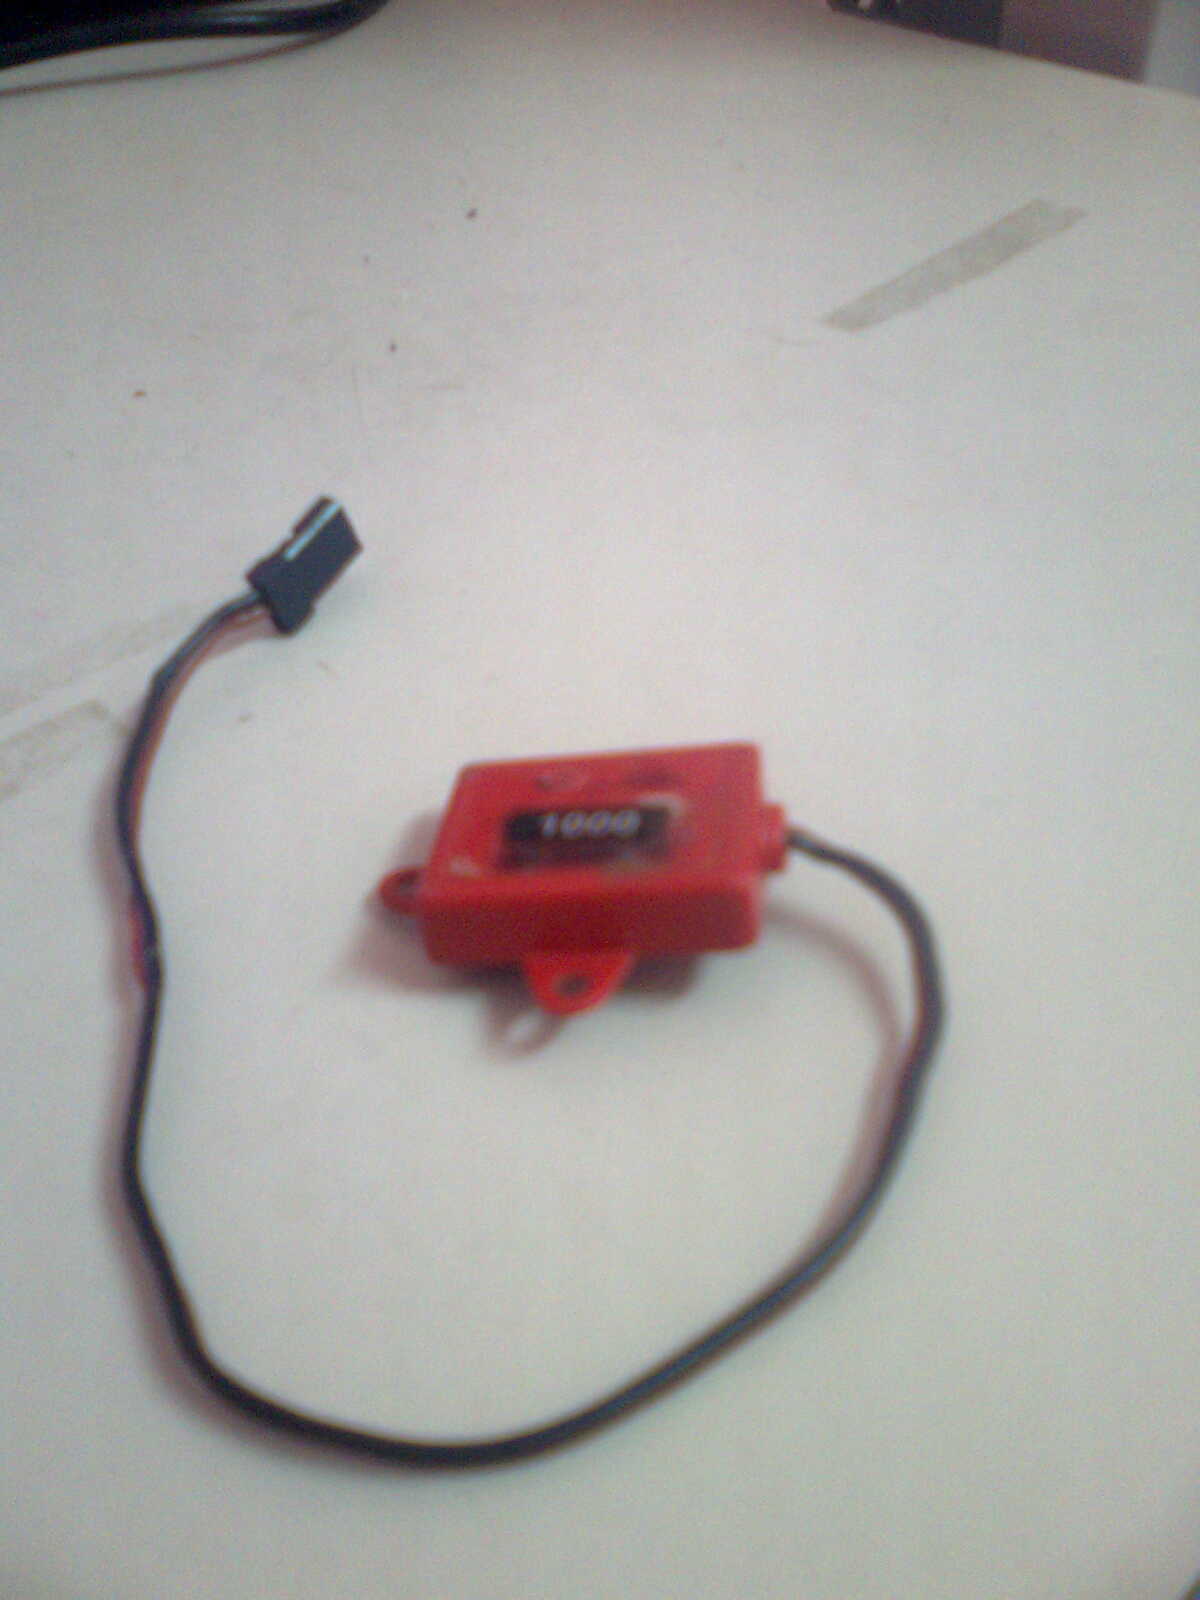 USED AMB RC TRANSPONDER FOR SALE - R/C Tech Forums